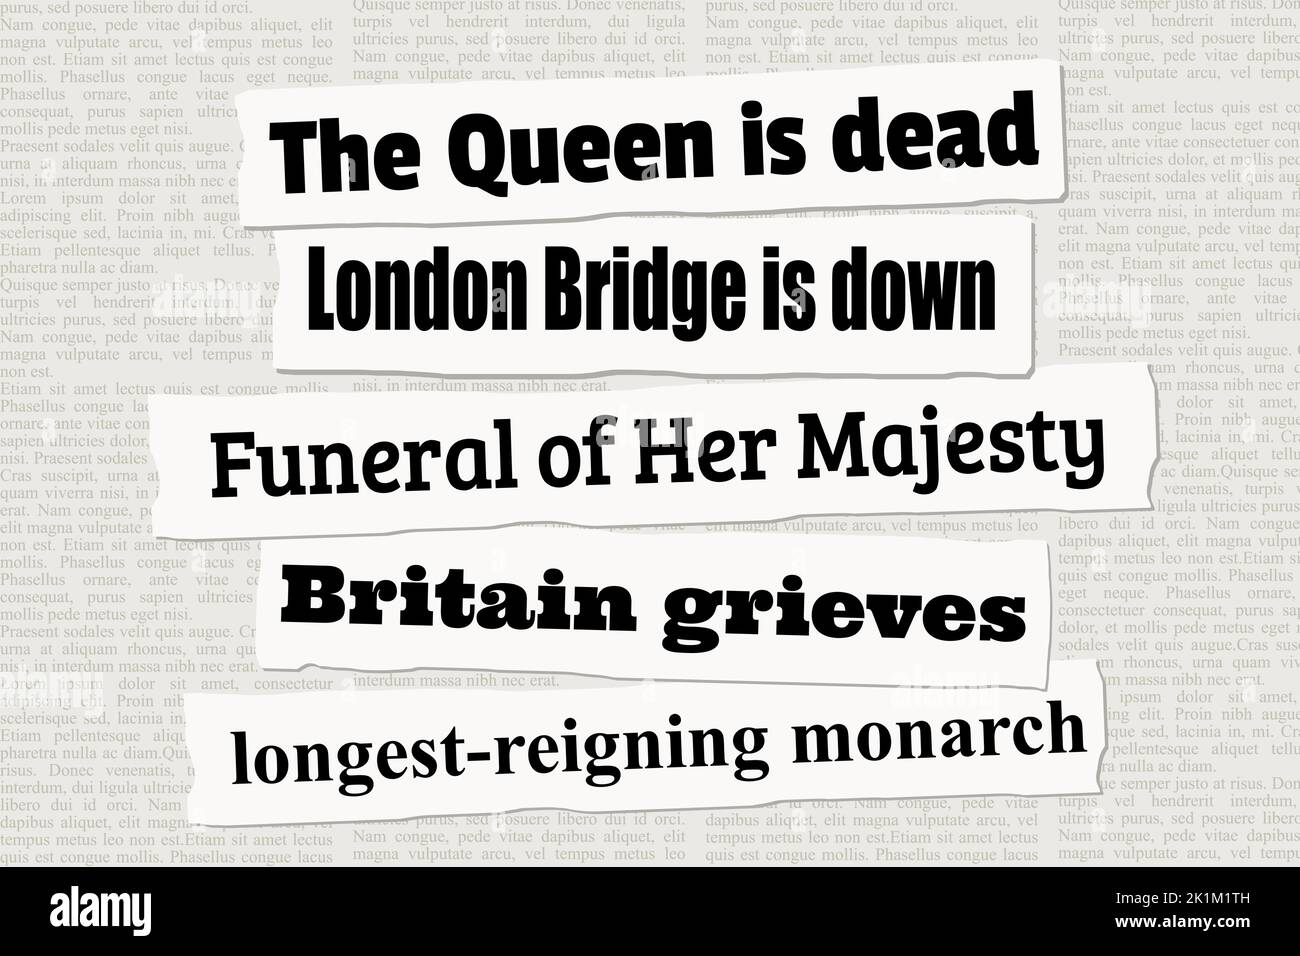 UK Queen death news headlines. Newspaper clippings about Queen's death and funeral. Stock Vector